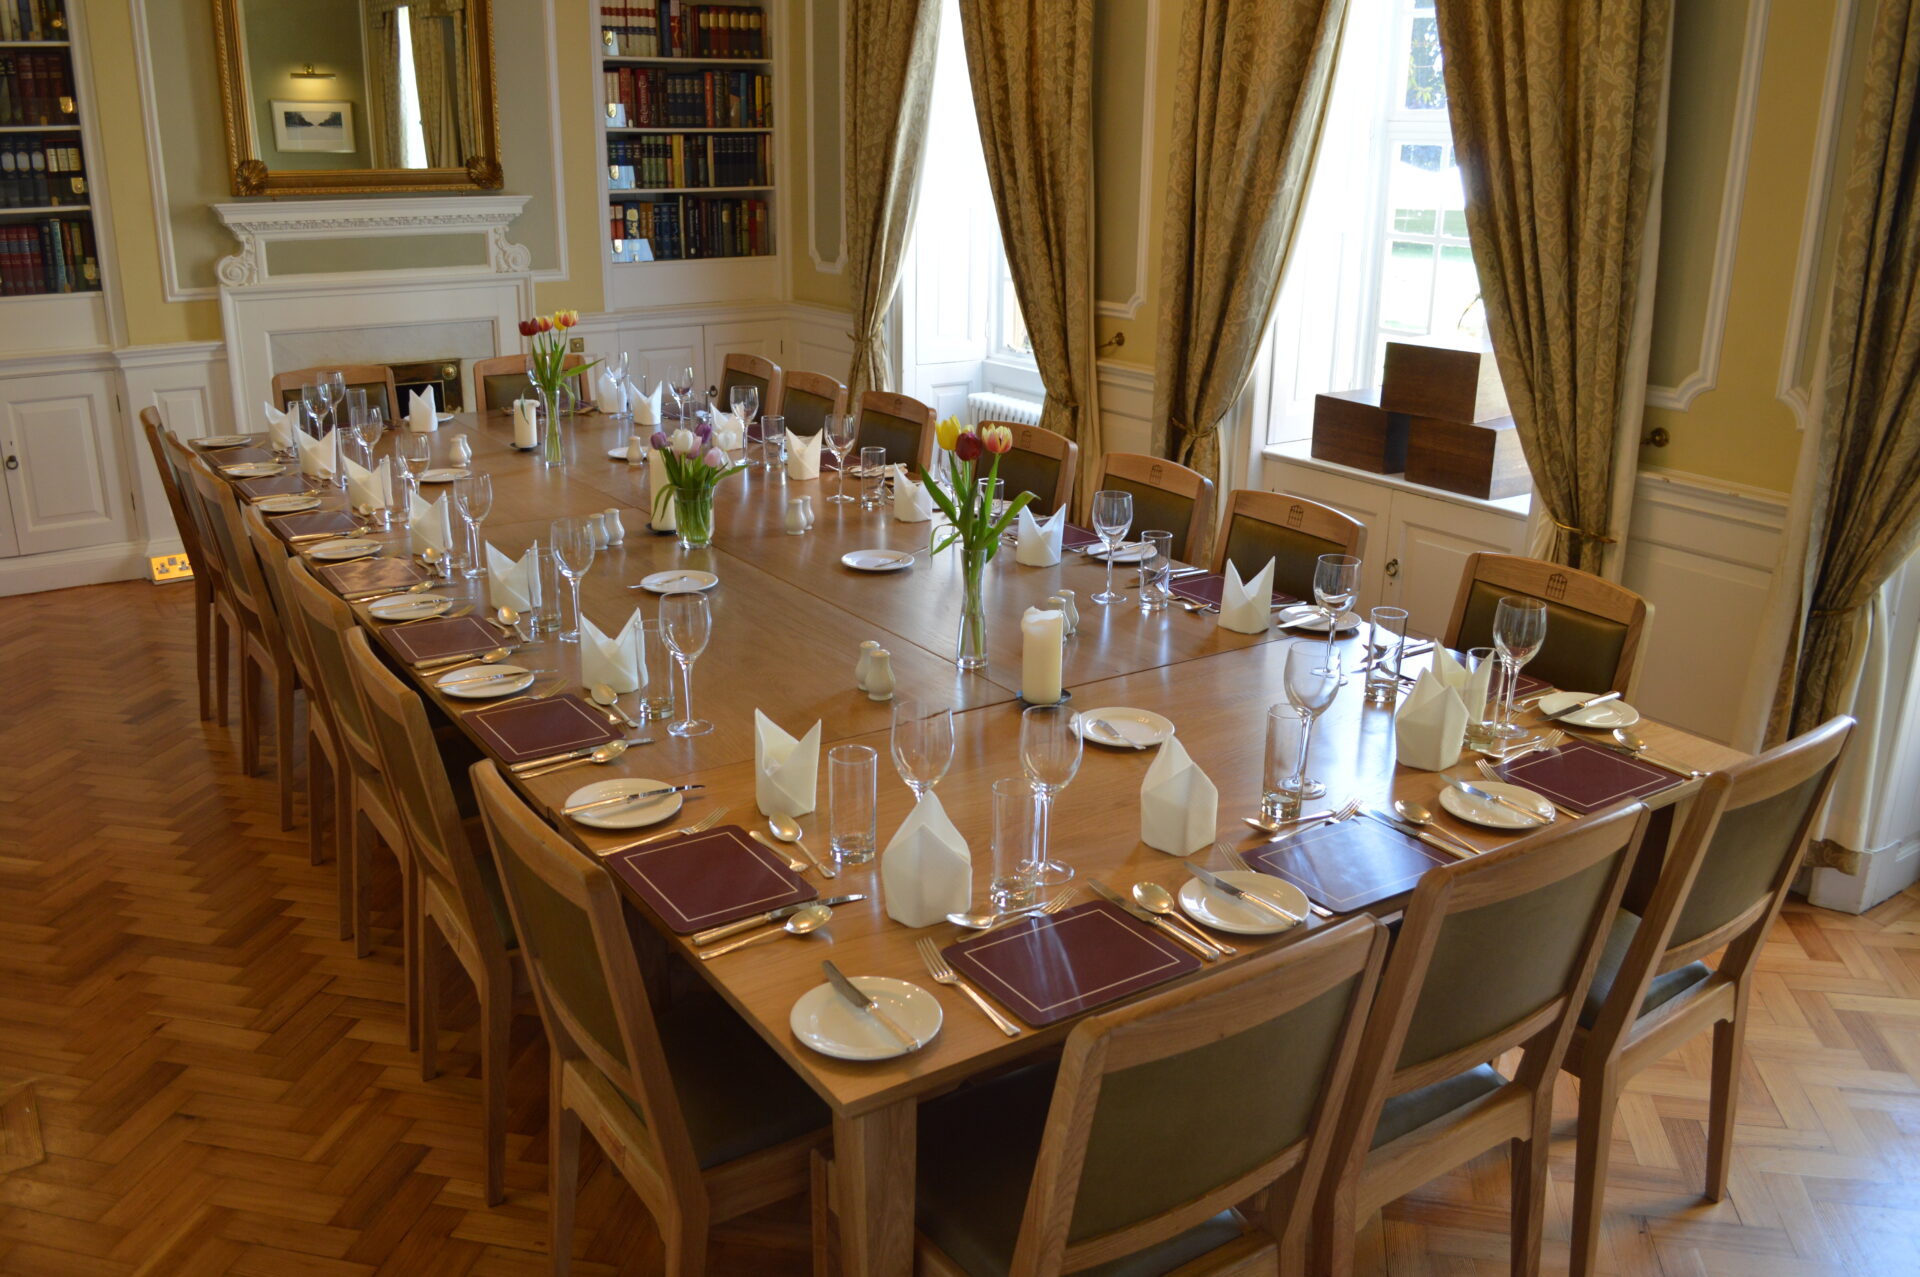 The Princess Helena Dining Room, laid out for dinner.